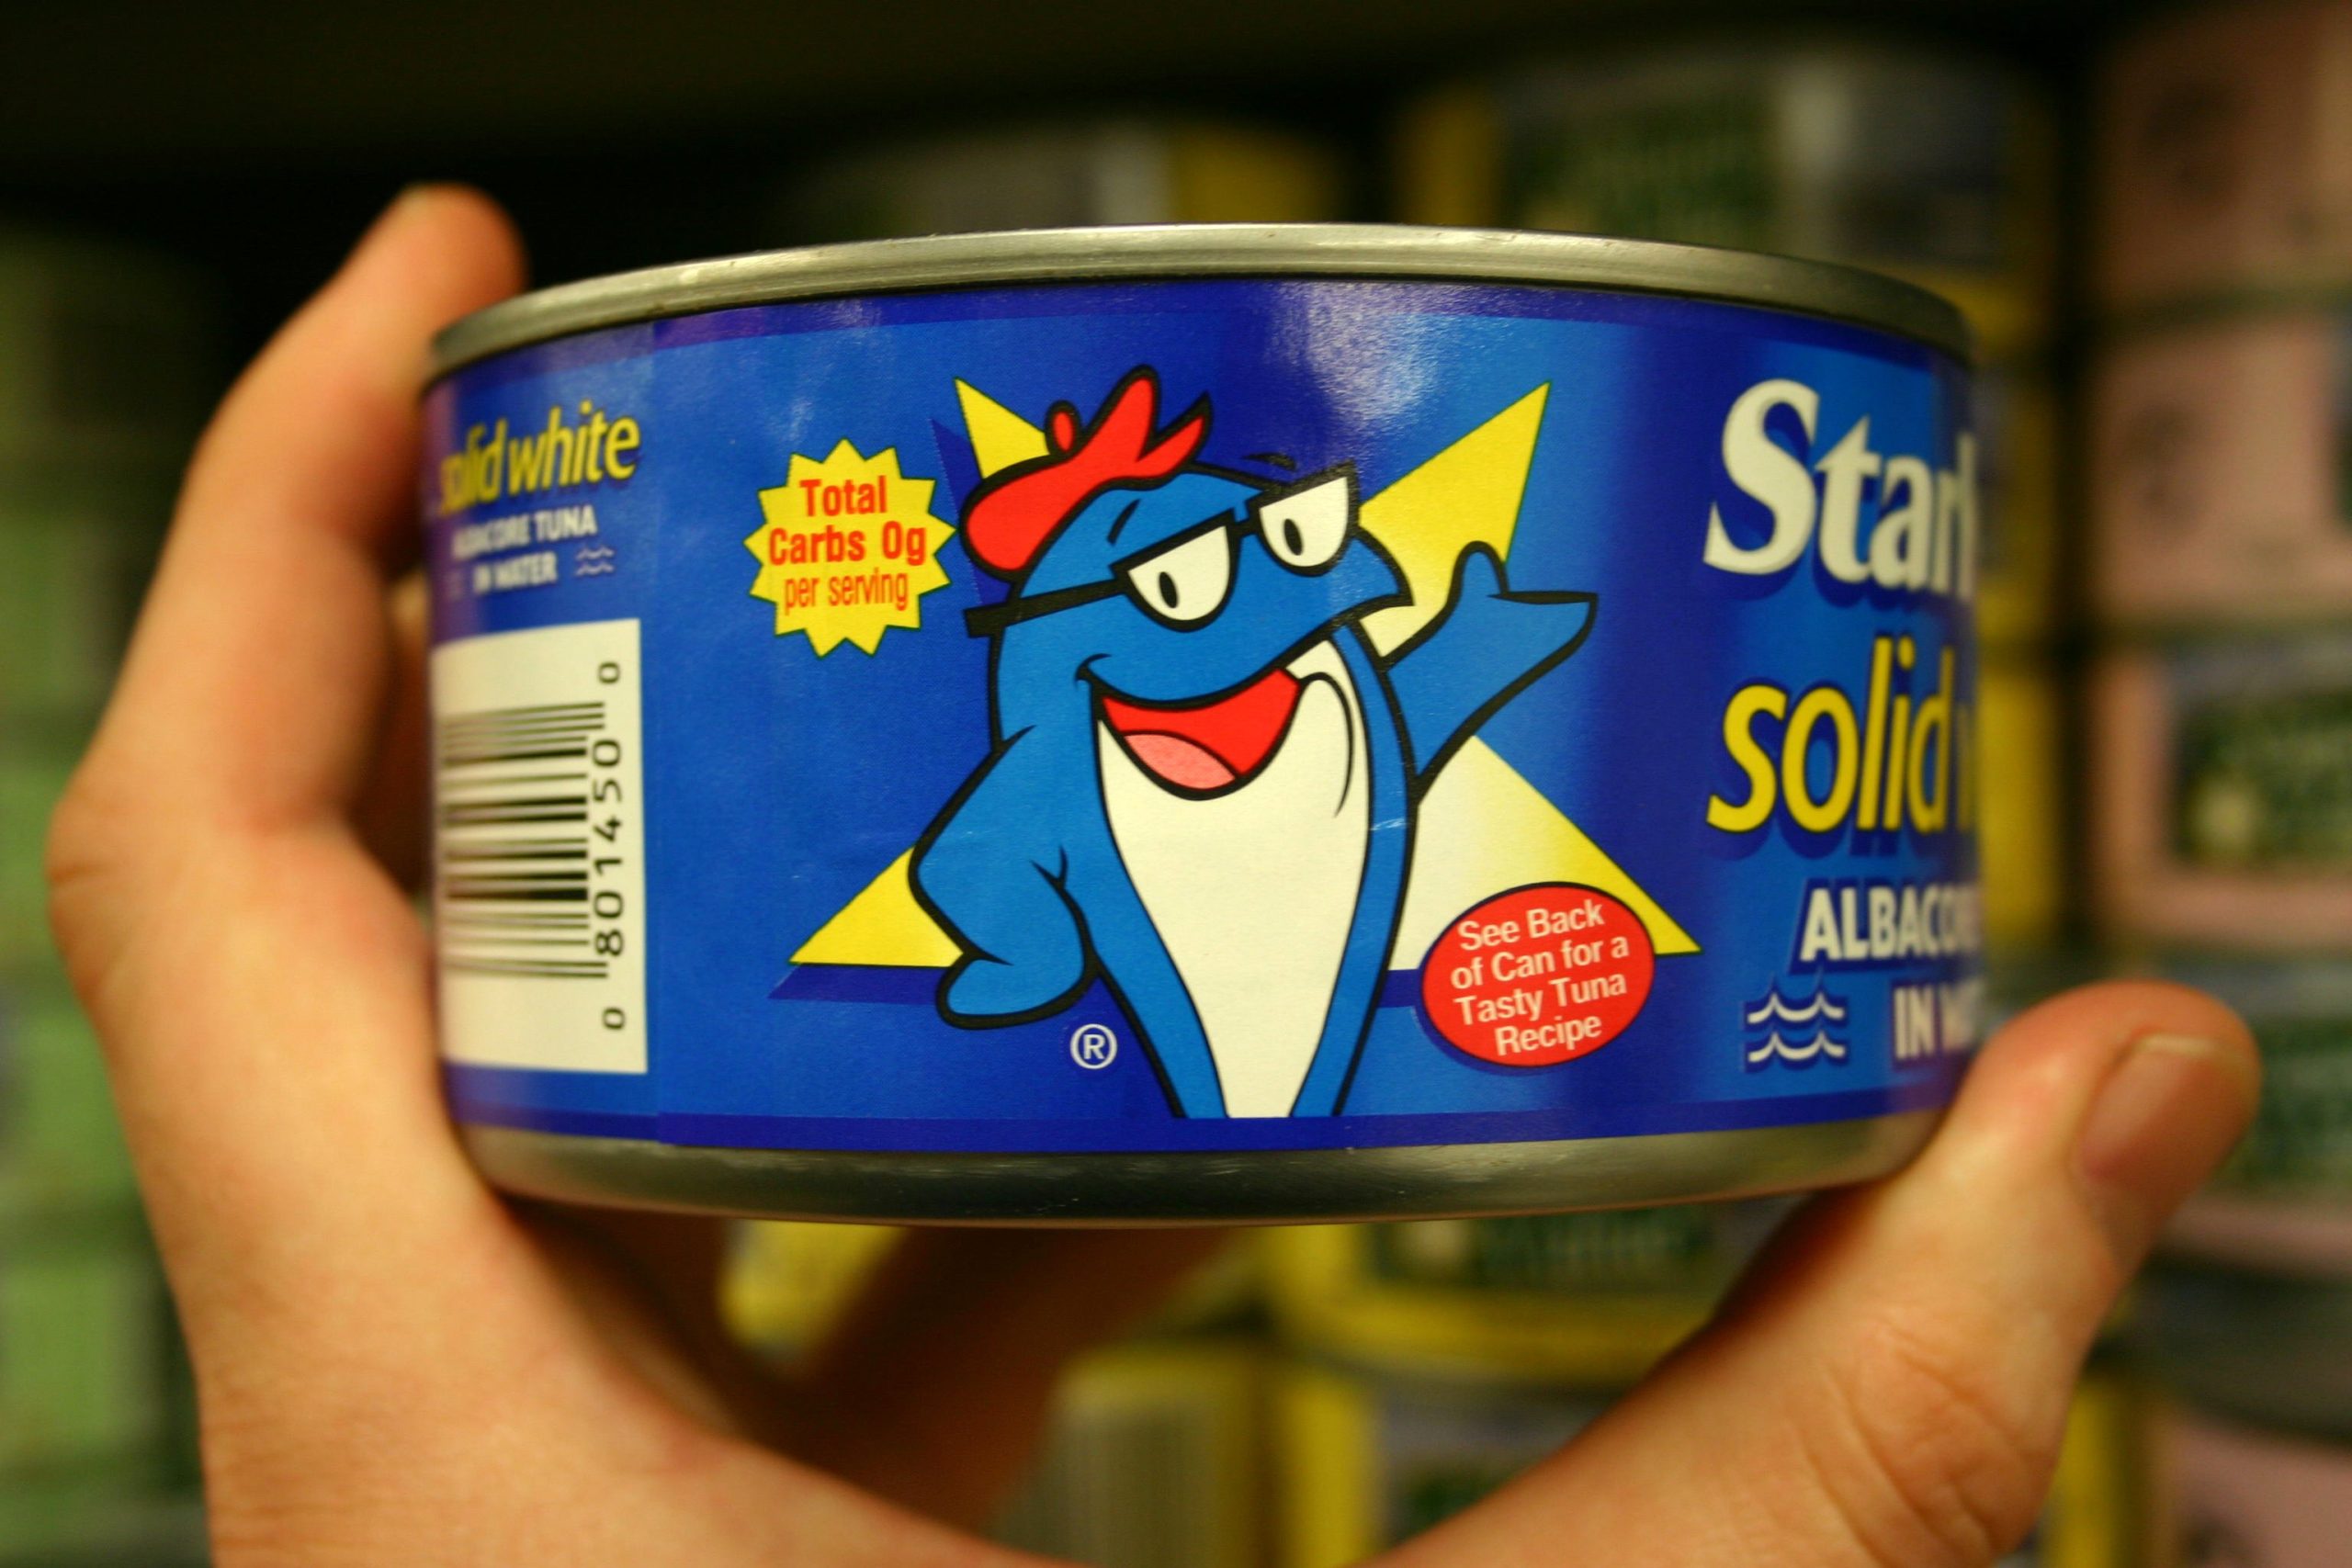 Photograph of someone holding a can of Starkist tuna with image of tuna character displayed